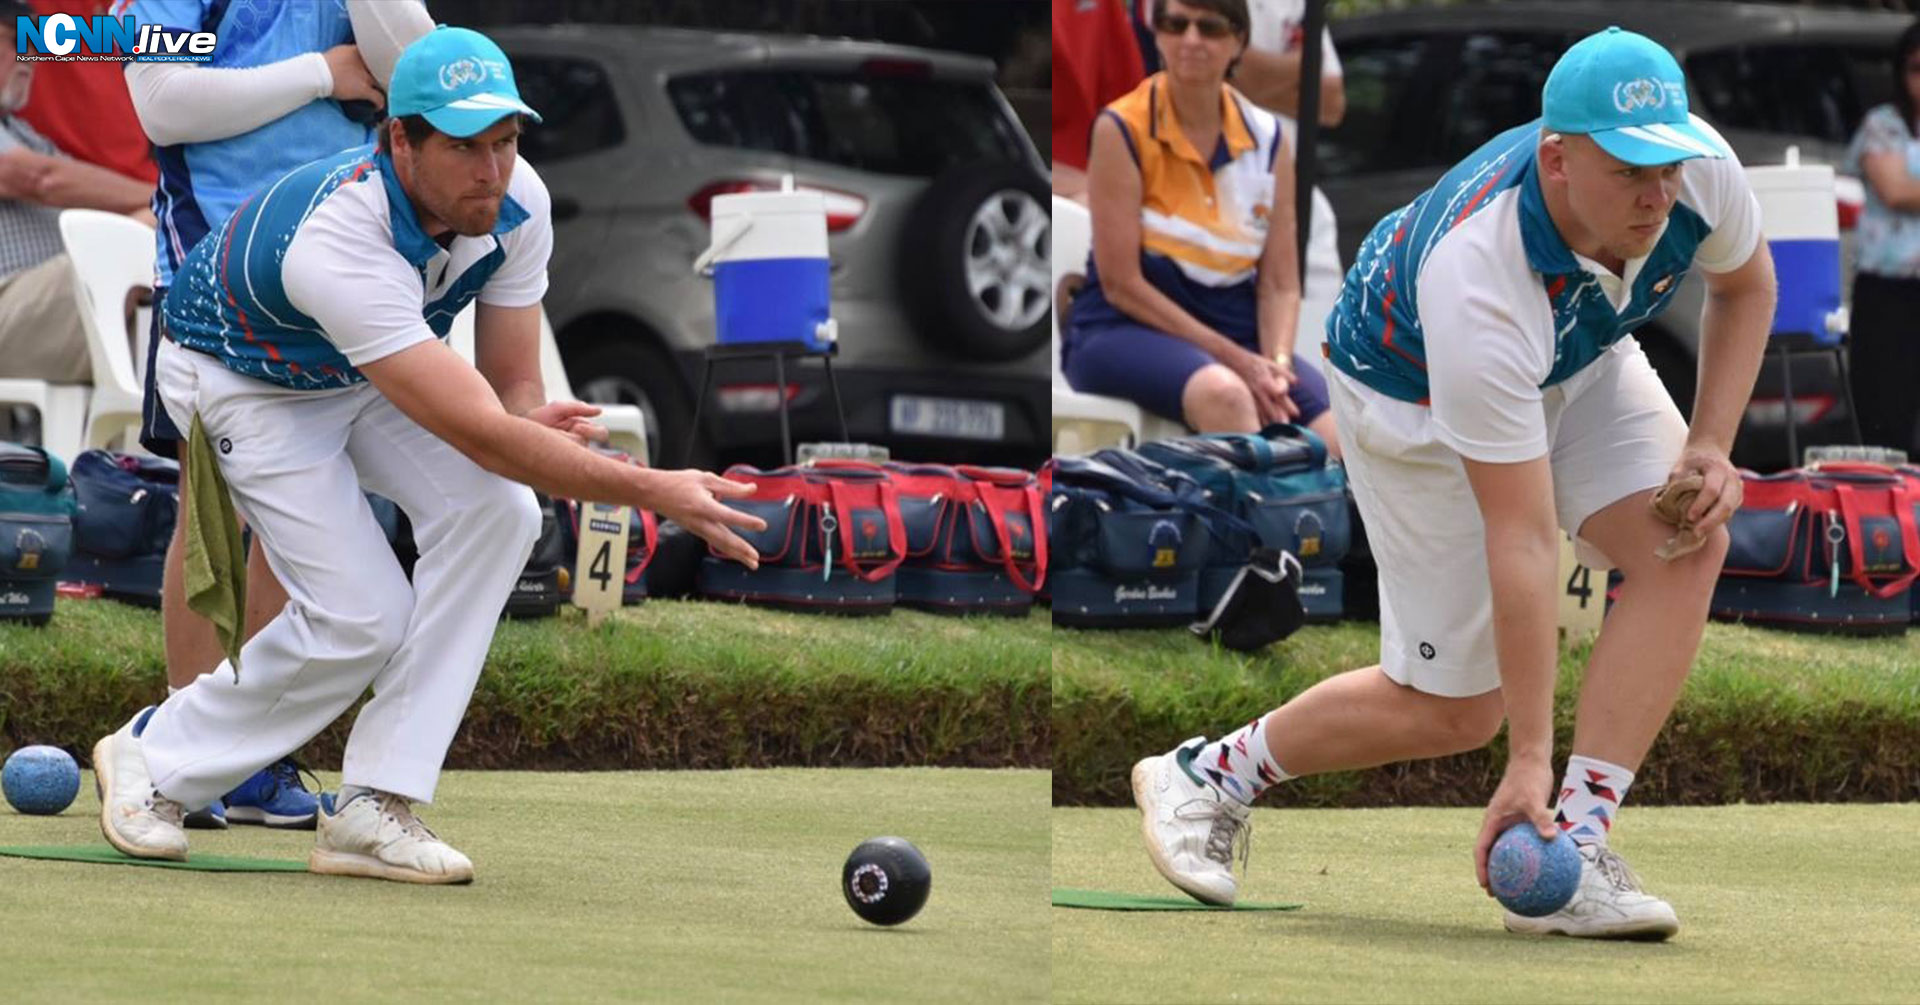 NORTHERN_CAPE_BOWLS_WANTS_ALL_TO_BOWL_FOR_THE_GROWTH_OF_THE_SPORT-FI